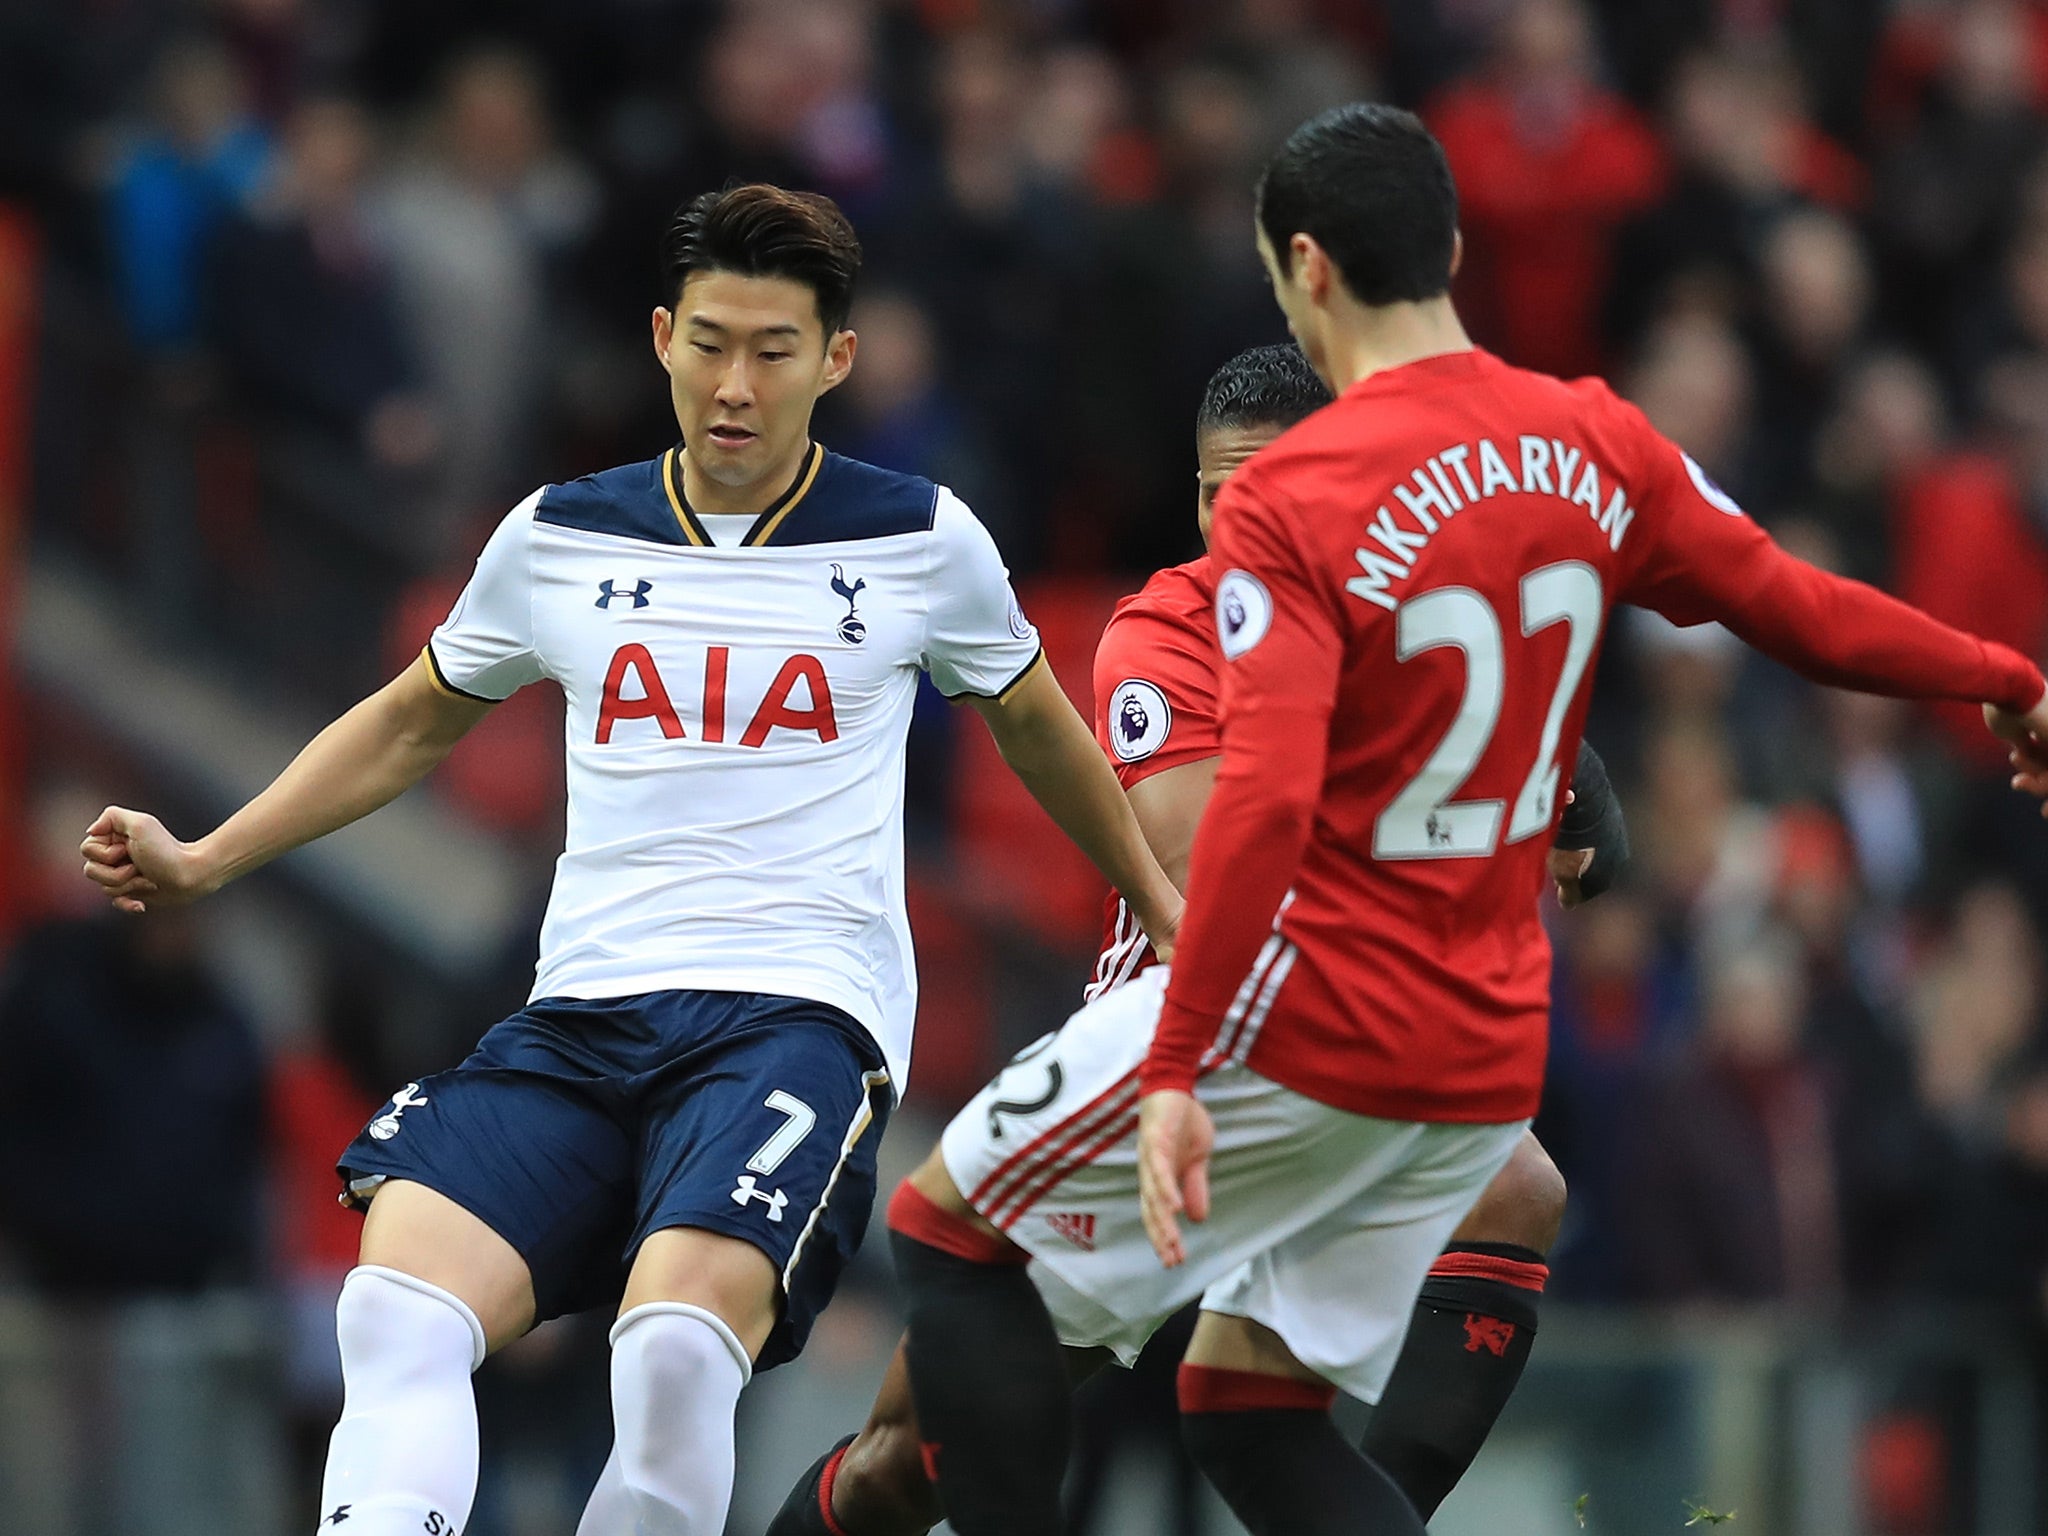 Son and Mkhitaryan battle for the ball in the opening stages at Old Trafford